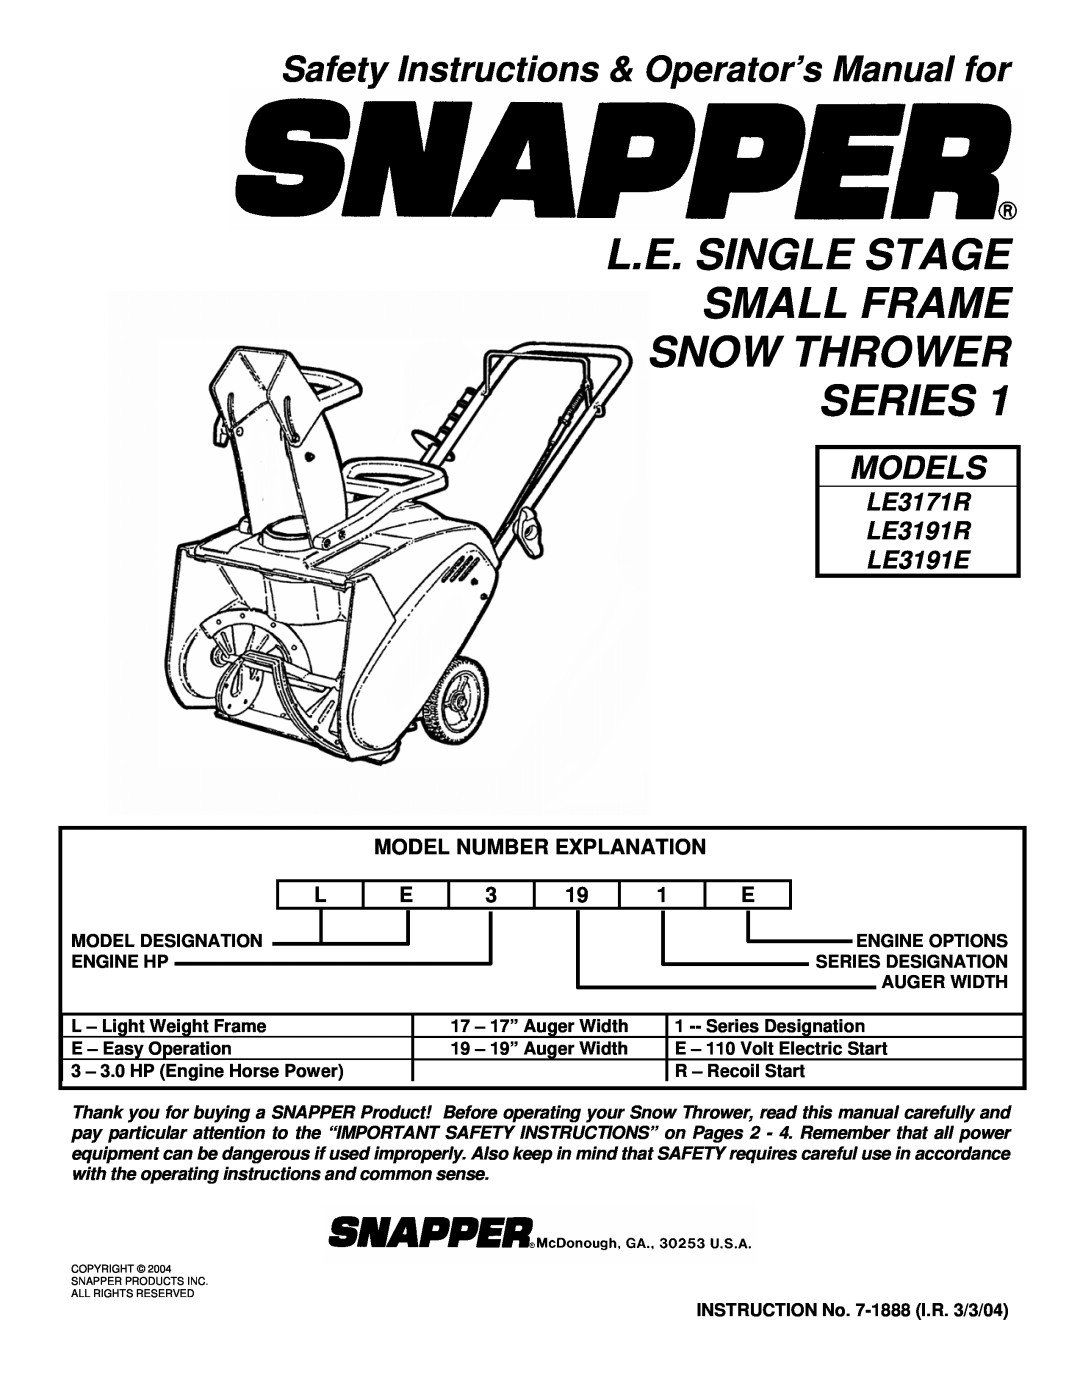 Snapper LE3171R, LE3191R, LE3191E important safety instructions L.E. Single Stage Small Frame Snow Thrower Series, Models 